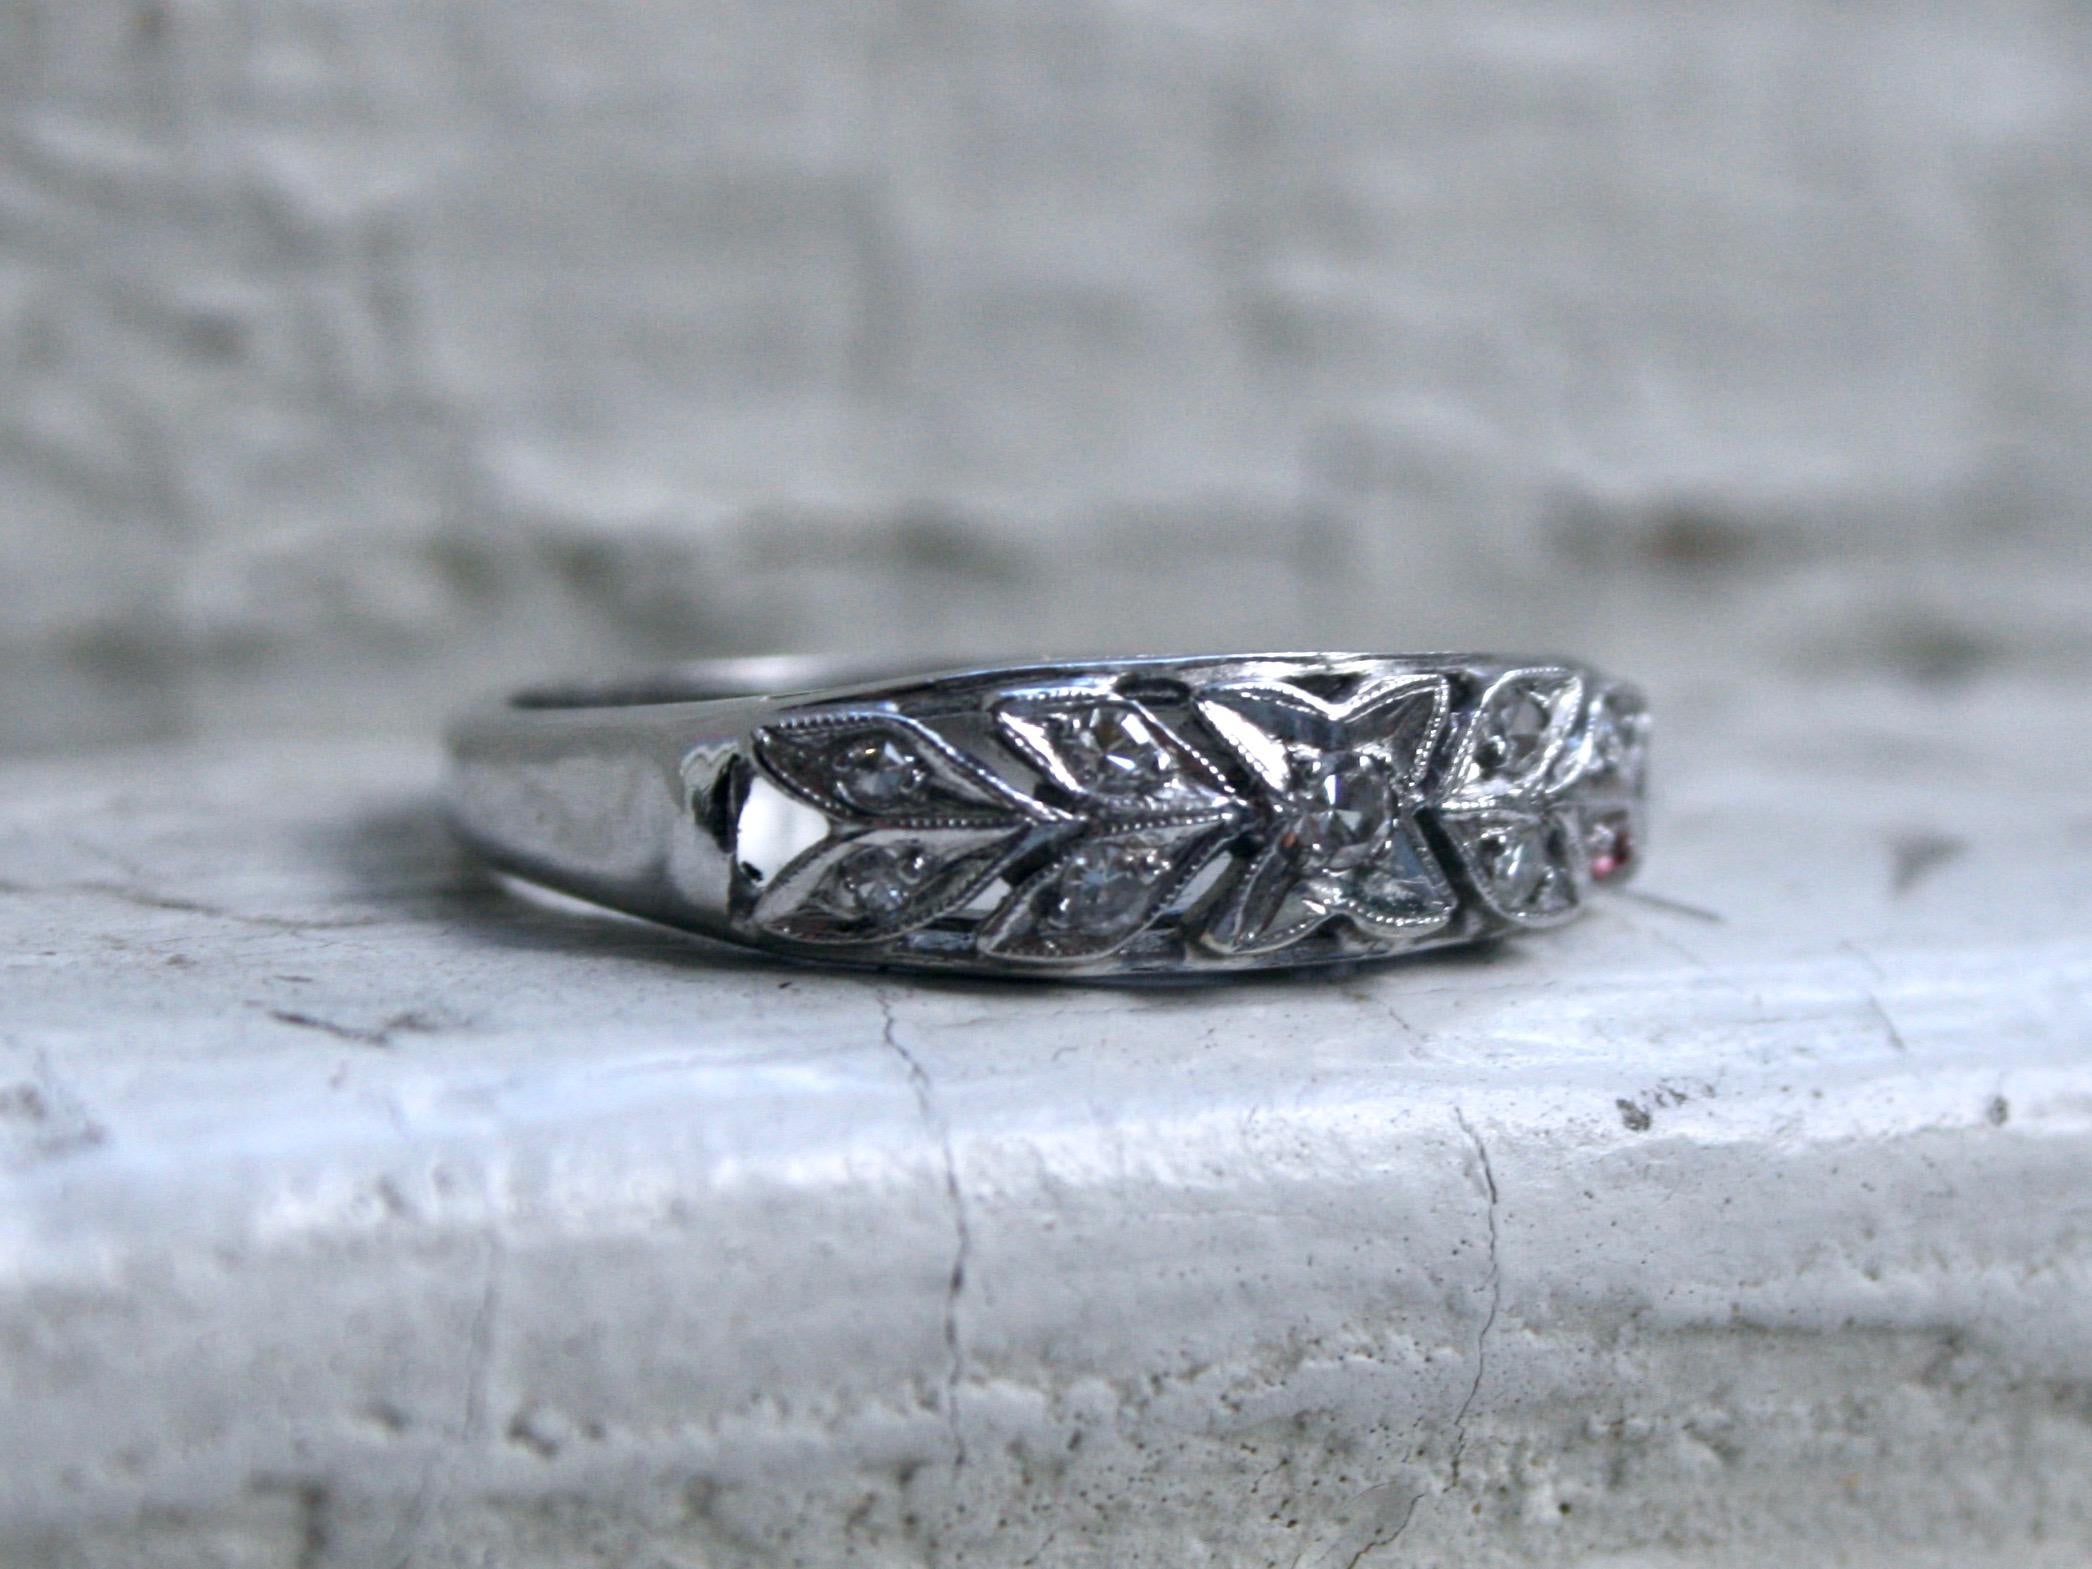 This Sweet Floral Vintage find would make a great wedding band or stackable! Crafted in a 14K White Gold, the band features a wonderful leafy design with Pave Set Diamonds. There are a total of 9 Single Cut Diamonds, totaling approximately 0.18ct,